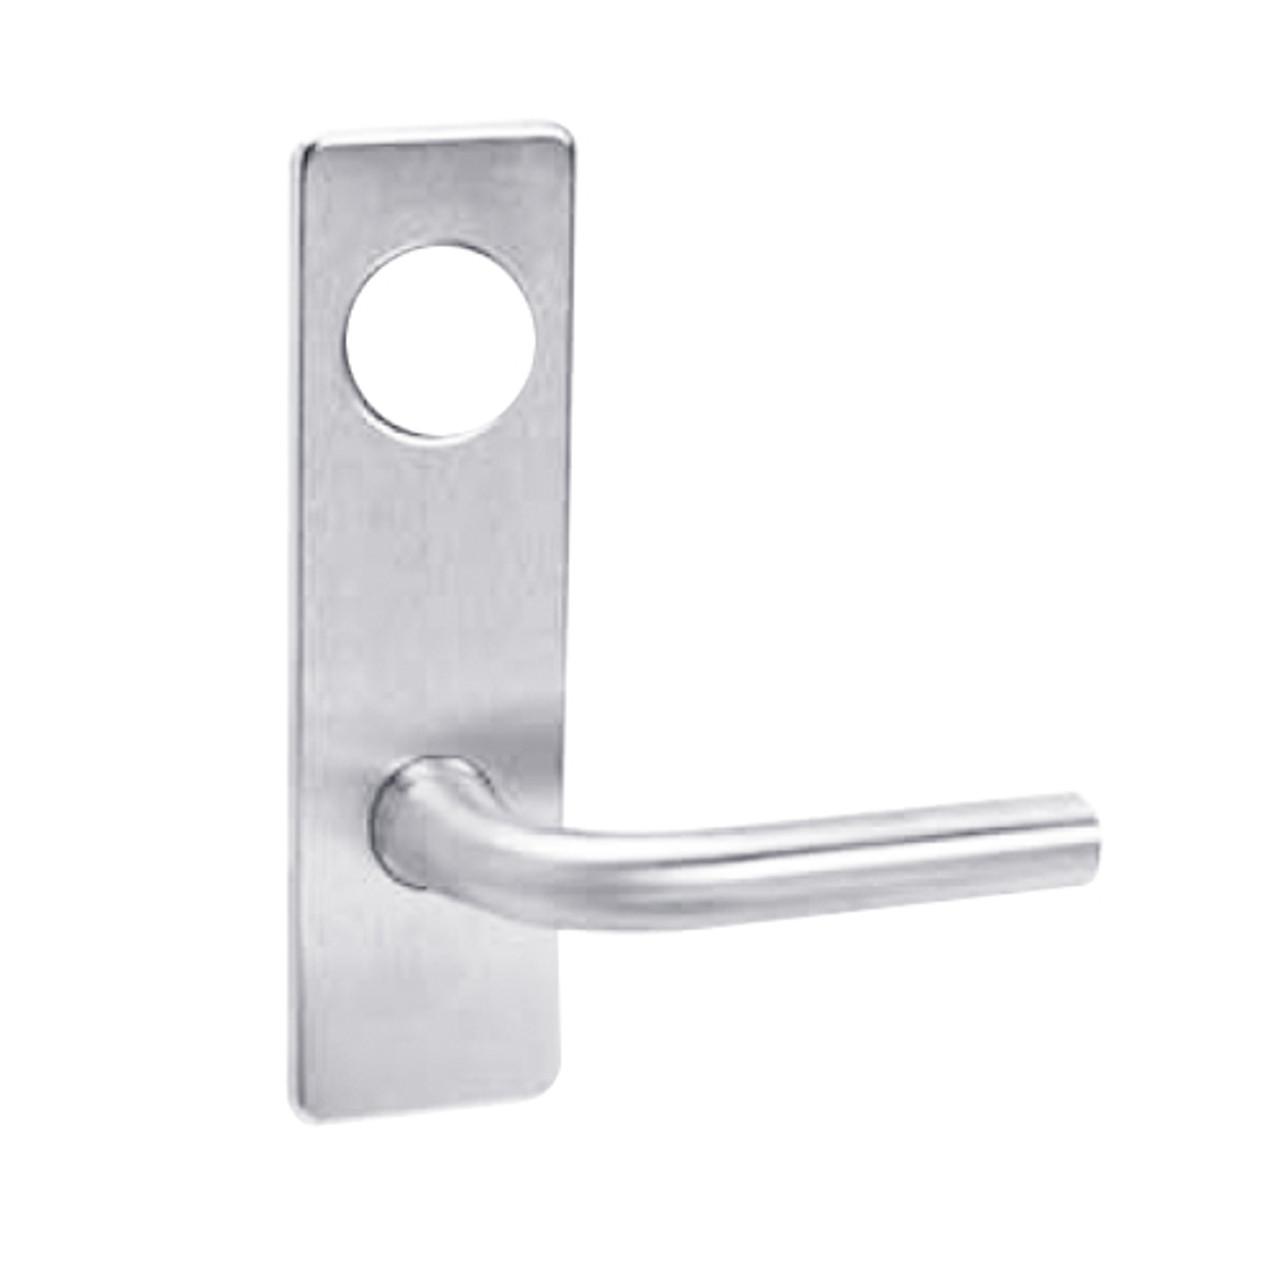 ML2054-RSR-625-CL7 Corbin Russwin ML2000 Series IC 7-Pin Less Core Mortise Entrance Locksets with Regis Lever in Bright Chrome